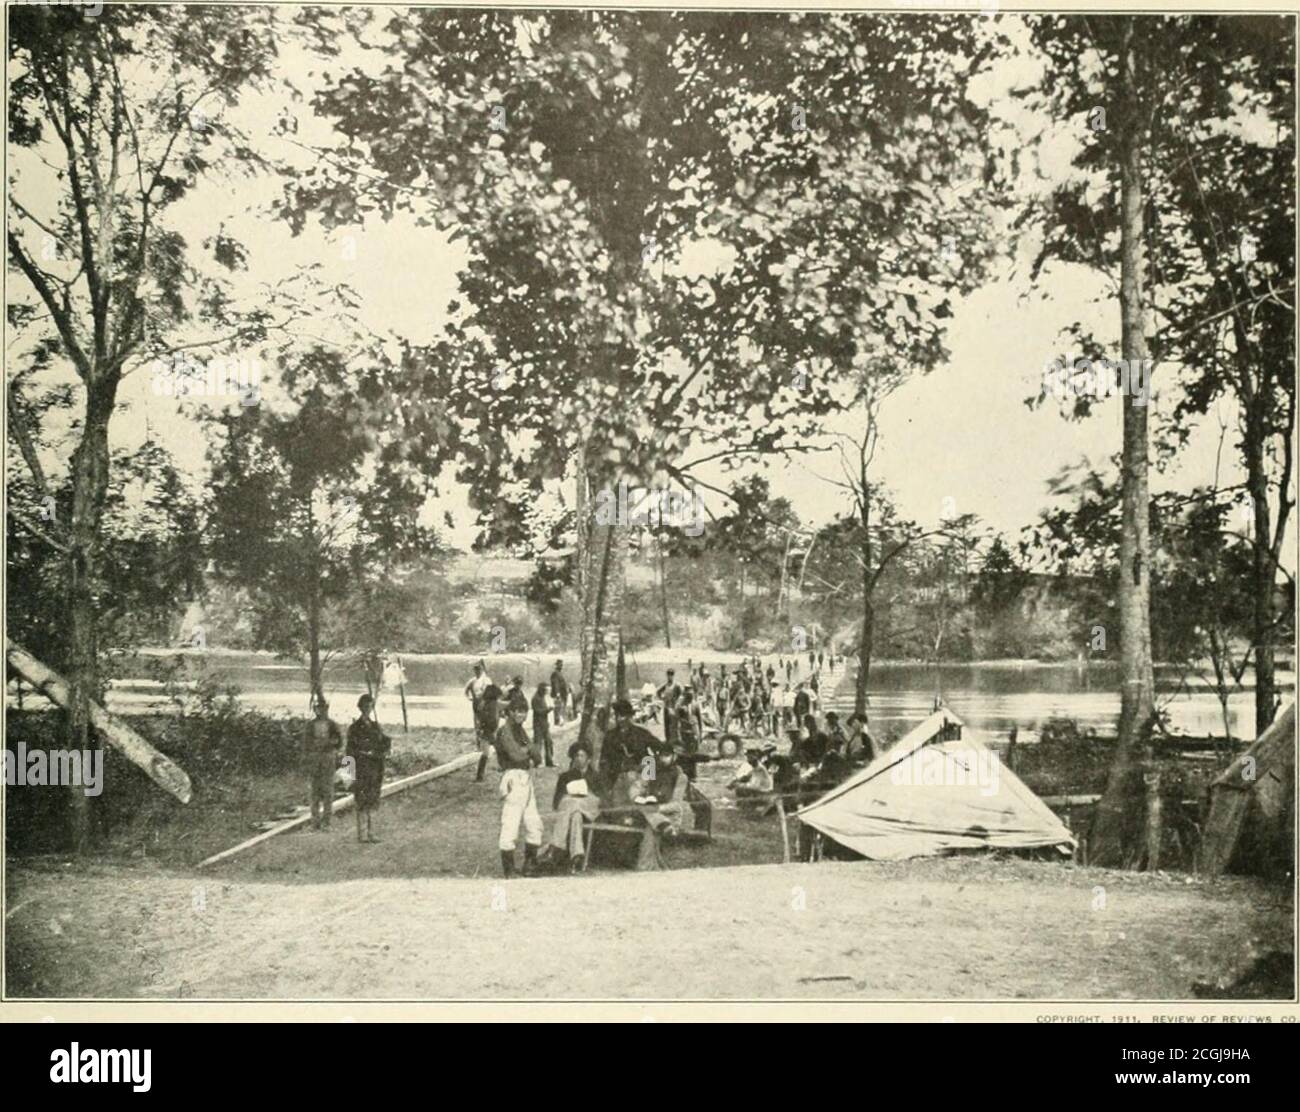 . The photographic history of the Civil War : thousands of scenes photographed 1861-65, with text by many special authorities . COPRiGhT. REVIEW OF REVIEWS CO. SOLDIERS HV THE TITER PONTOON BIUDOE AT DEEP BOTTOM JAMES RIVER, lH(i|. To construct a pontoon bridge the first boat launched was rowedup-stream a short distance. The anchor was let go. Us rope wasthen paid out sufficiently to drop the boat down into position.A second anchor was dropped a short distance down-stream, if thecurrent proved irregular.The second boat was placedin position by the same proc-ess. Then the sills of thebridge, ca Stock Photo